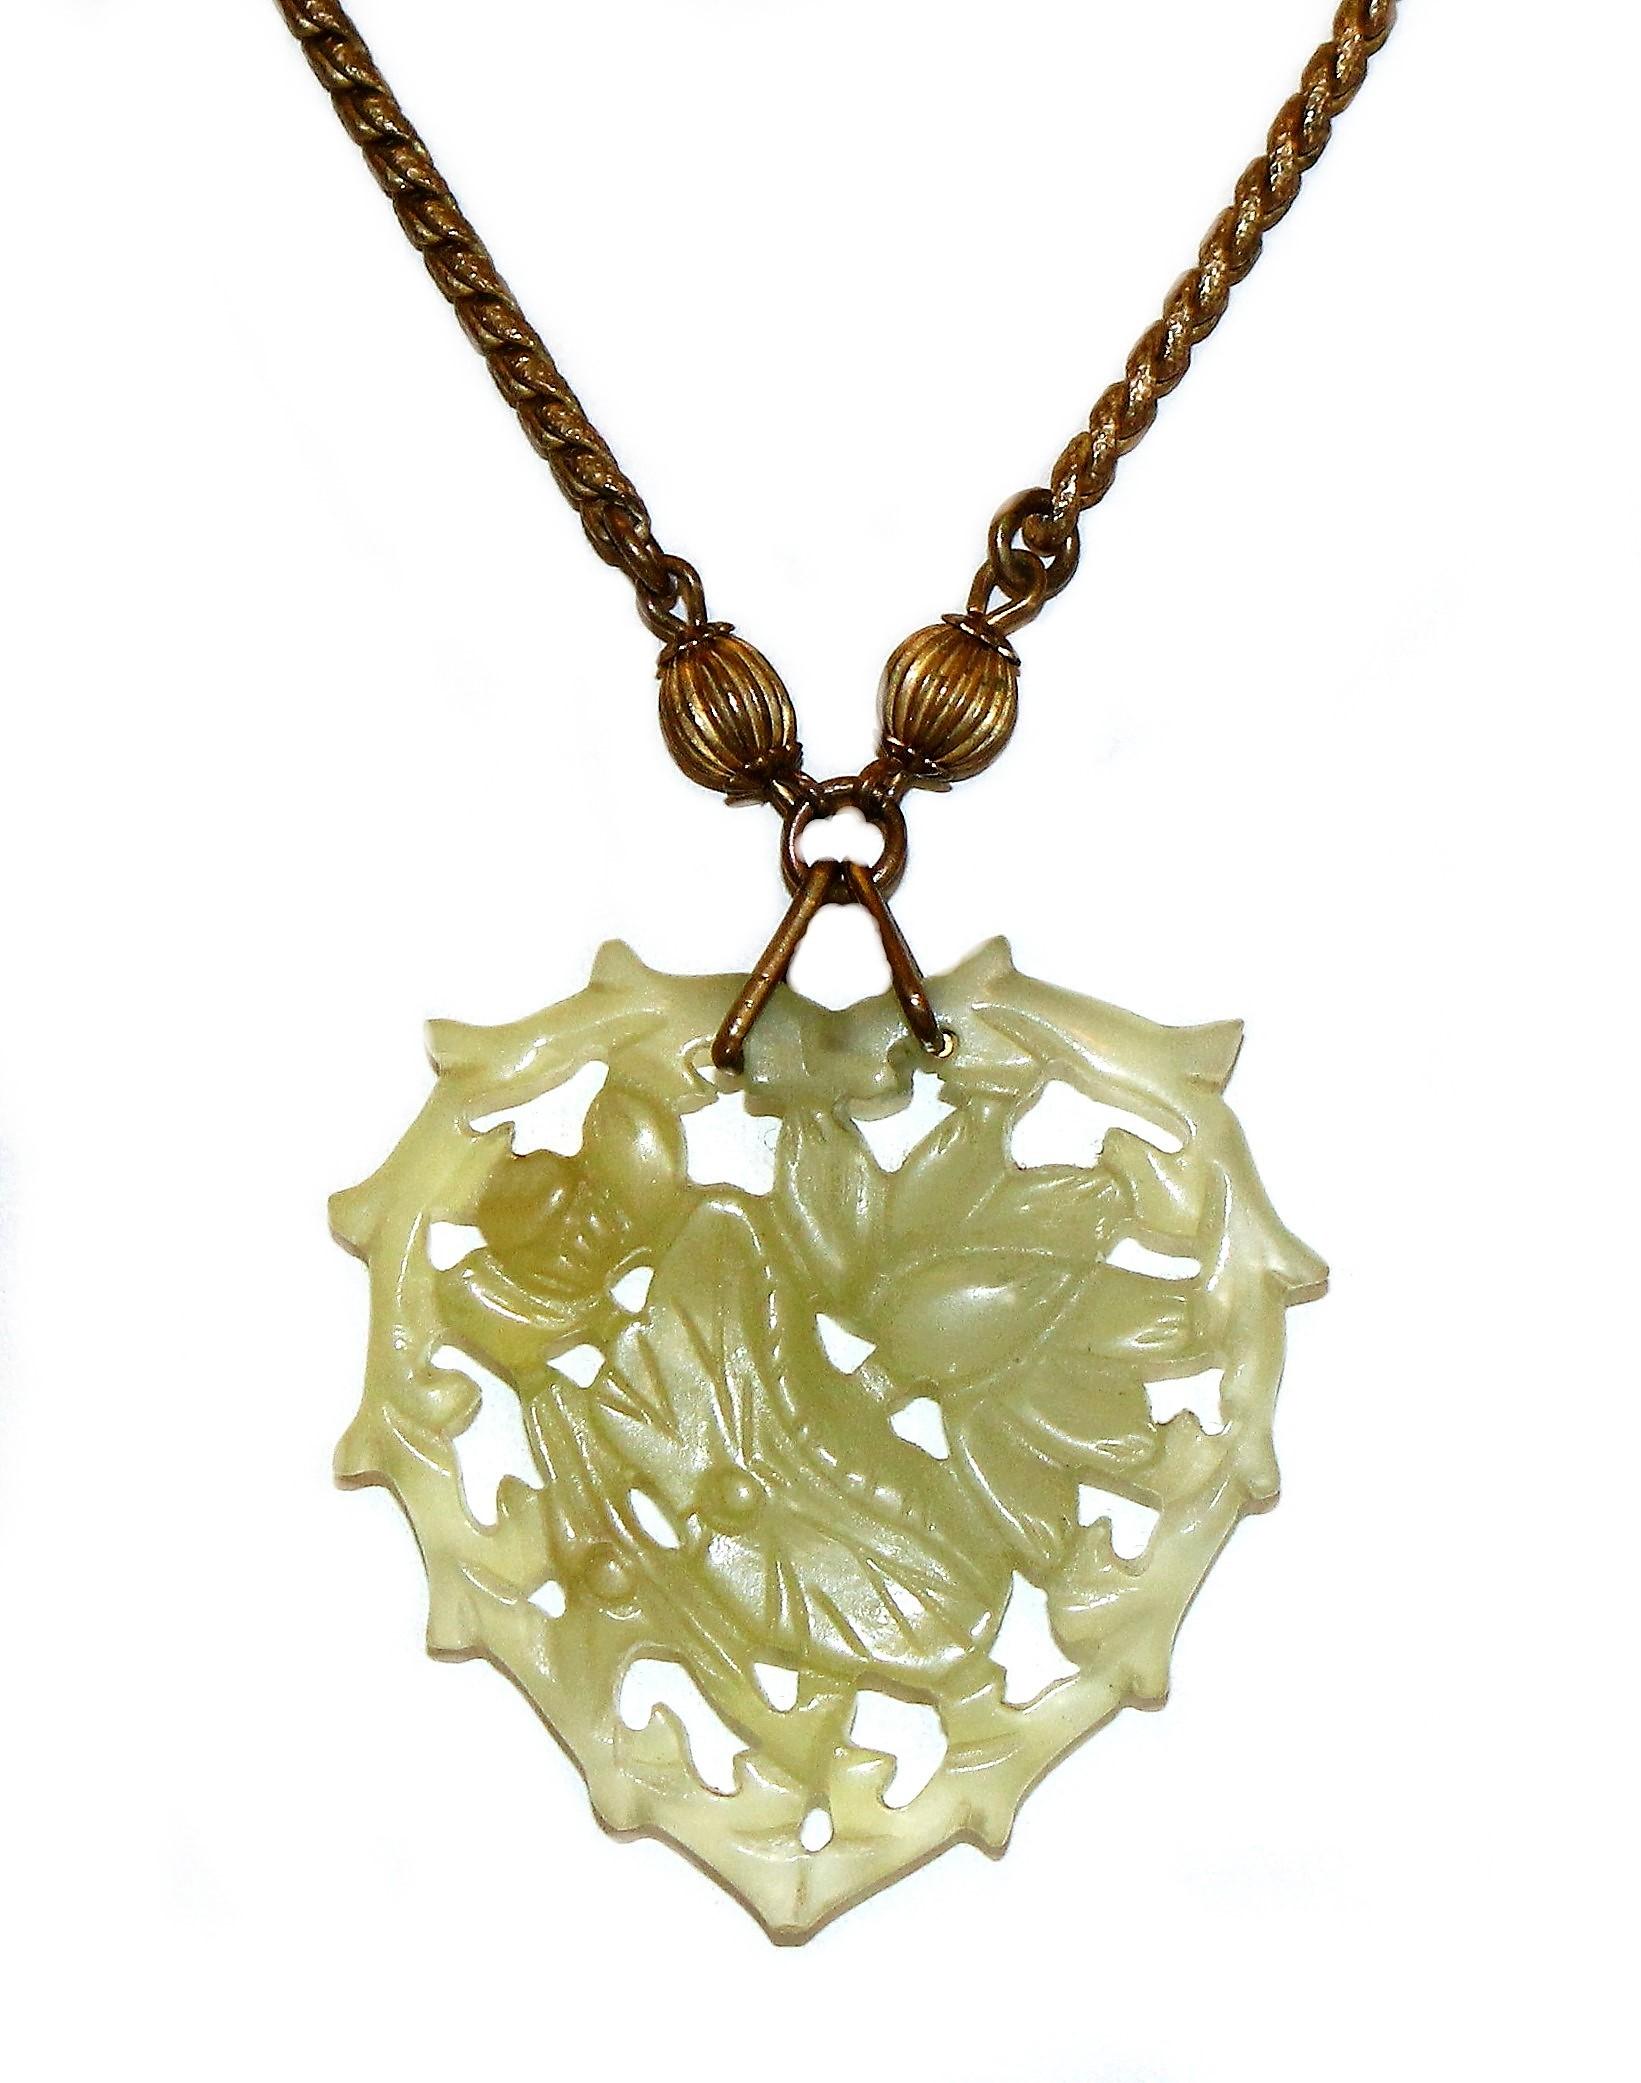 Circa 1970s Miriam Haskell long gold tone necklace with a pale green molded glass heart decorated with a water lily and butterfly motif.  The necklace is embellished with beads of jade-green glass and brass.  It measures 30